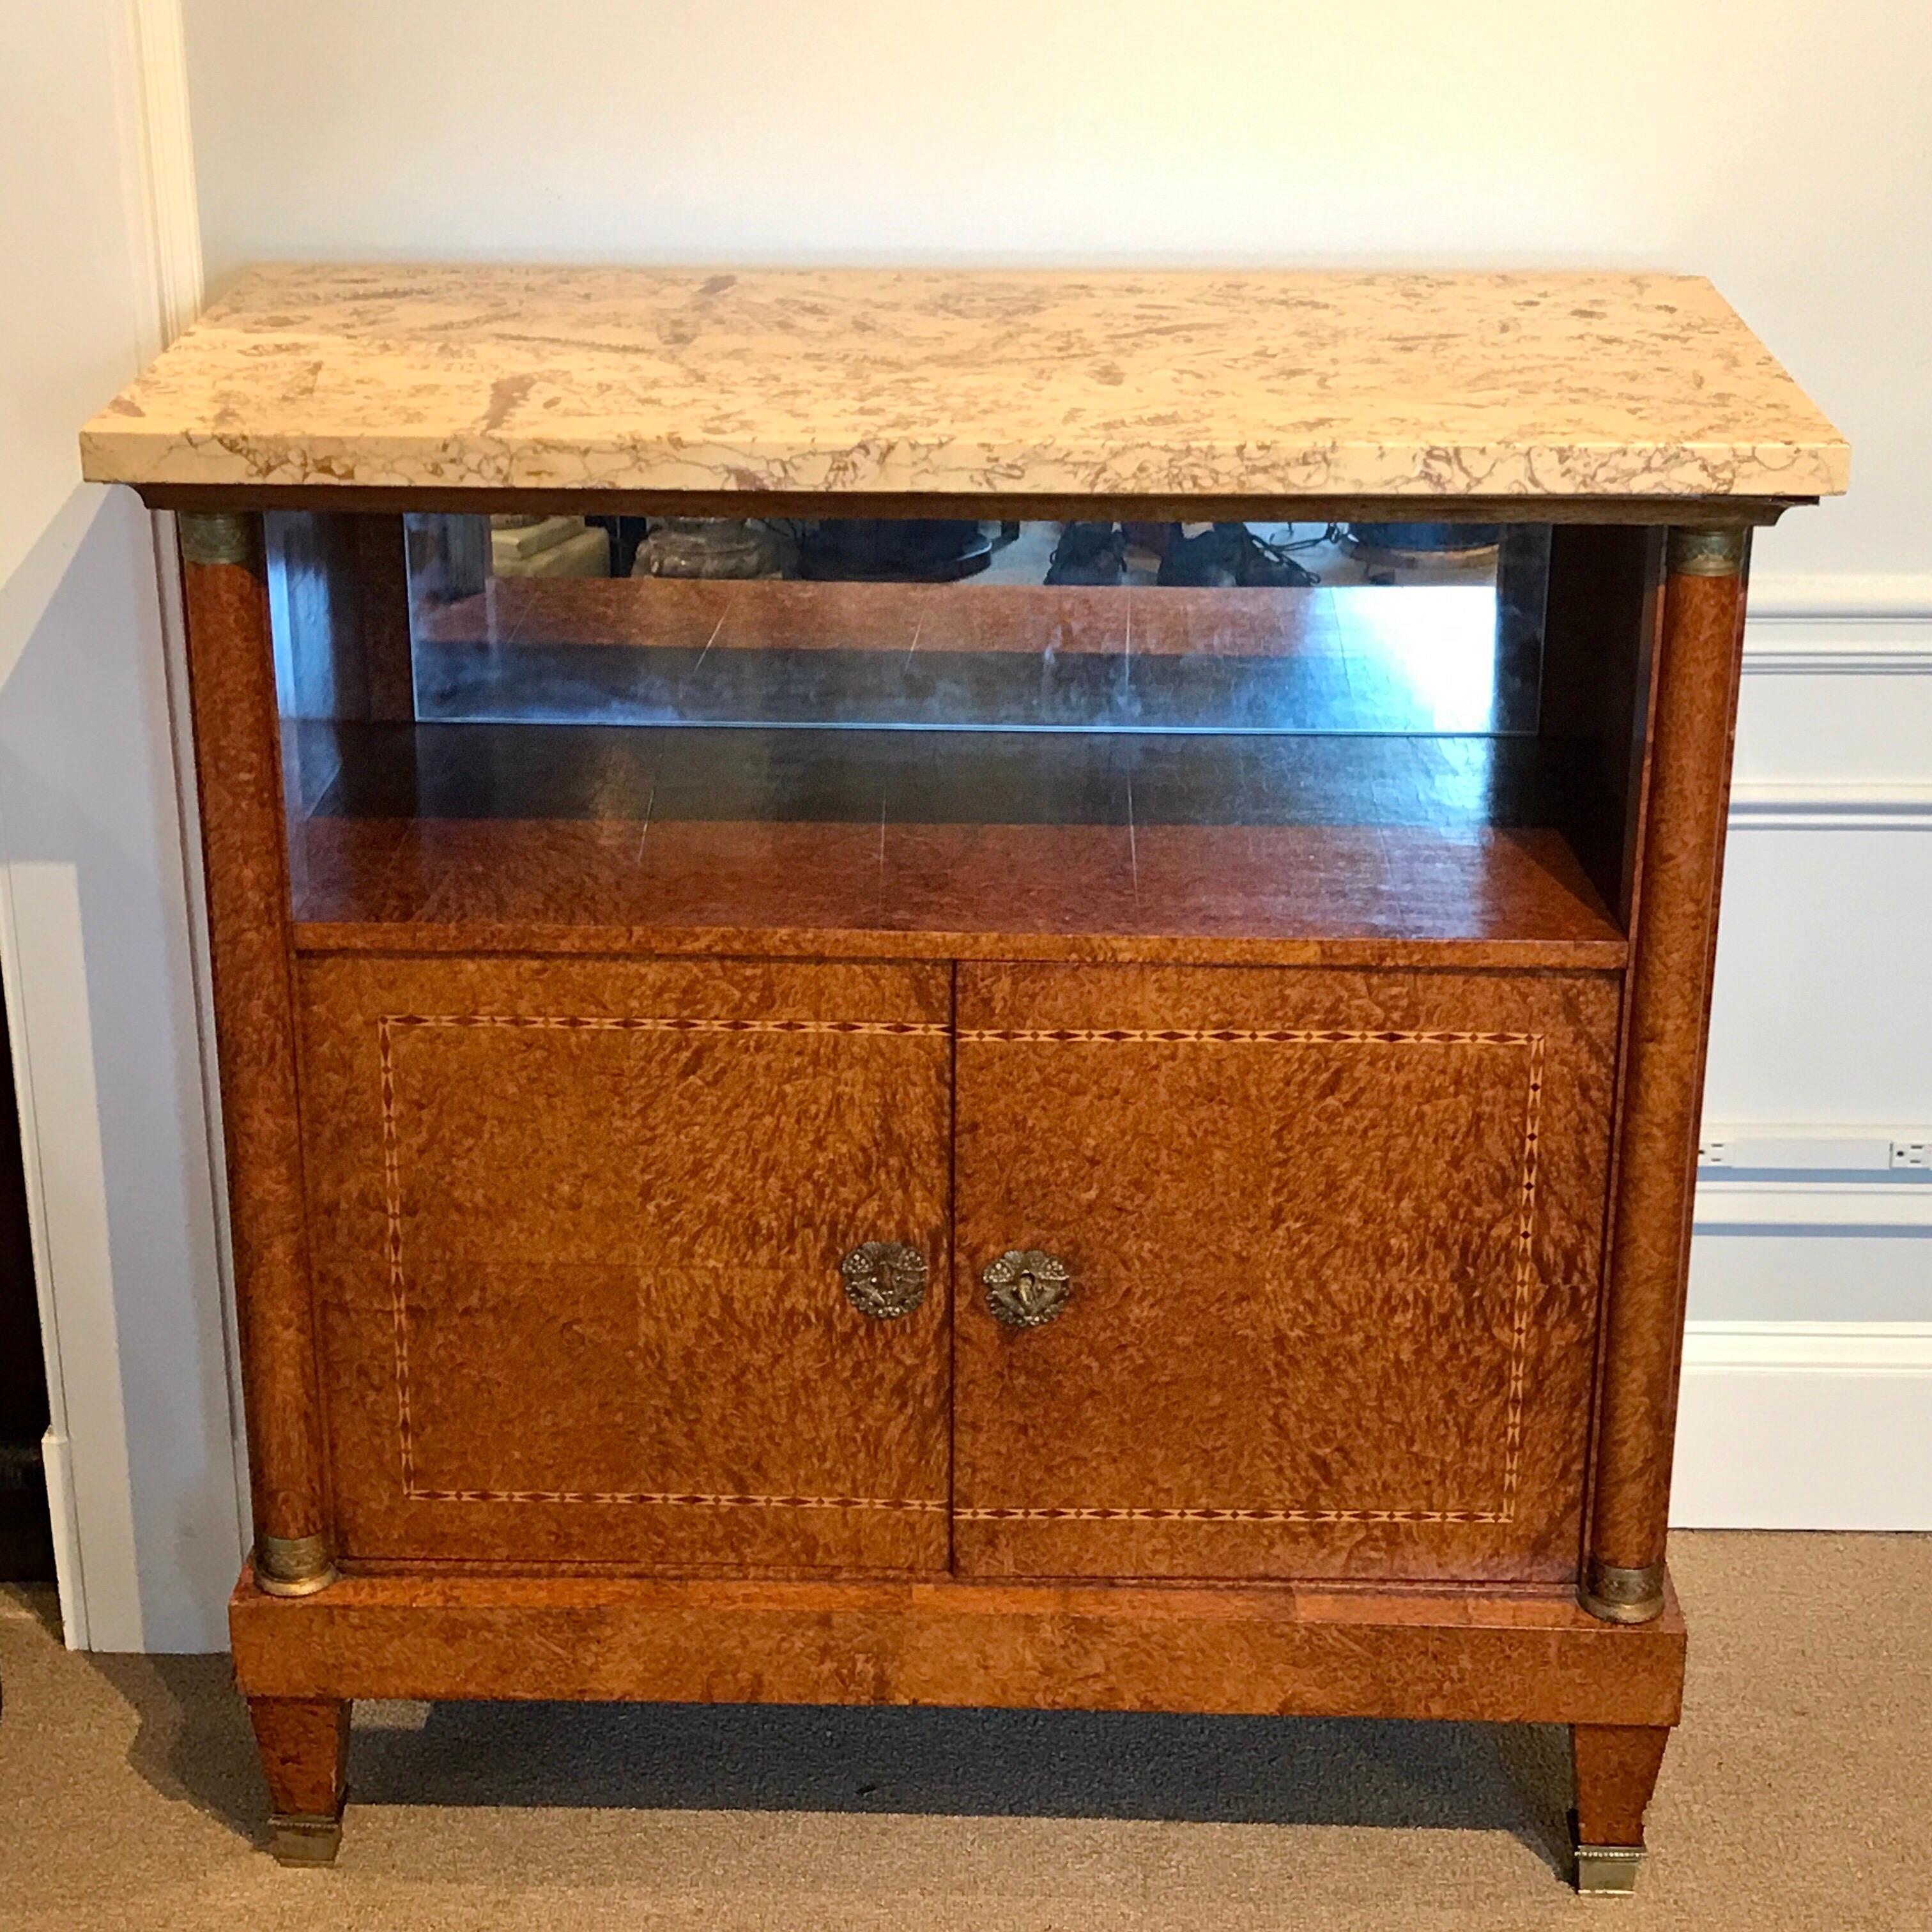 French Sienna marble and burlwood bar or sideboard, with thick sienna marble top with infused fossils, over a conforming case with one mirror back shelf (32